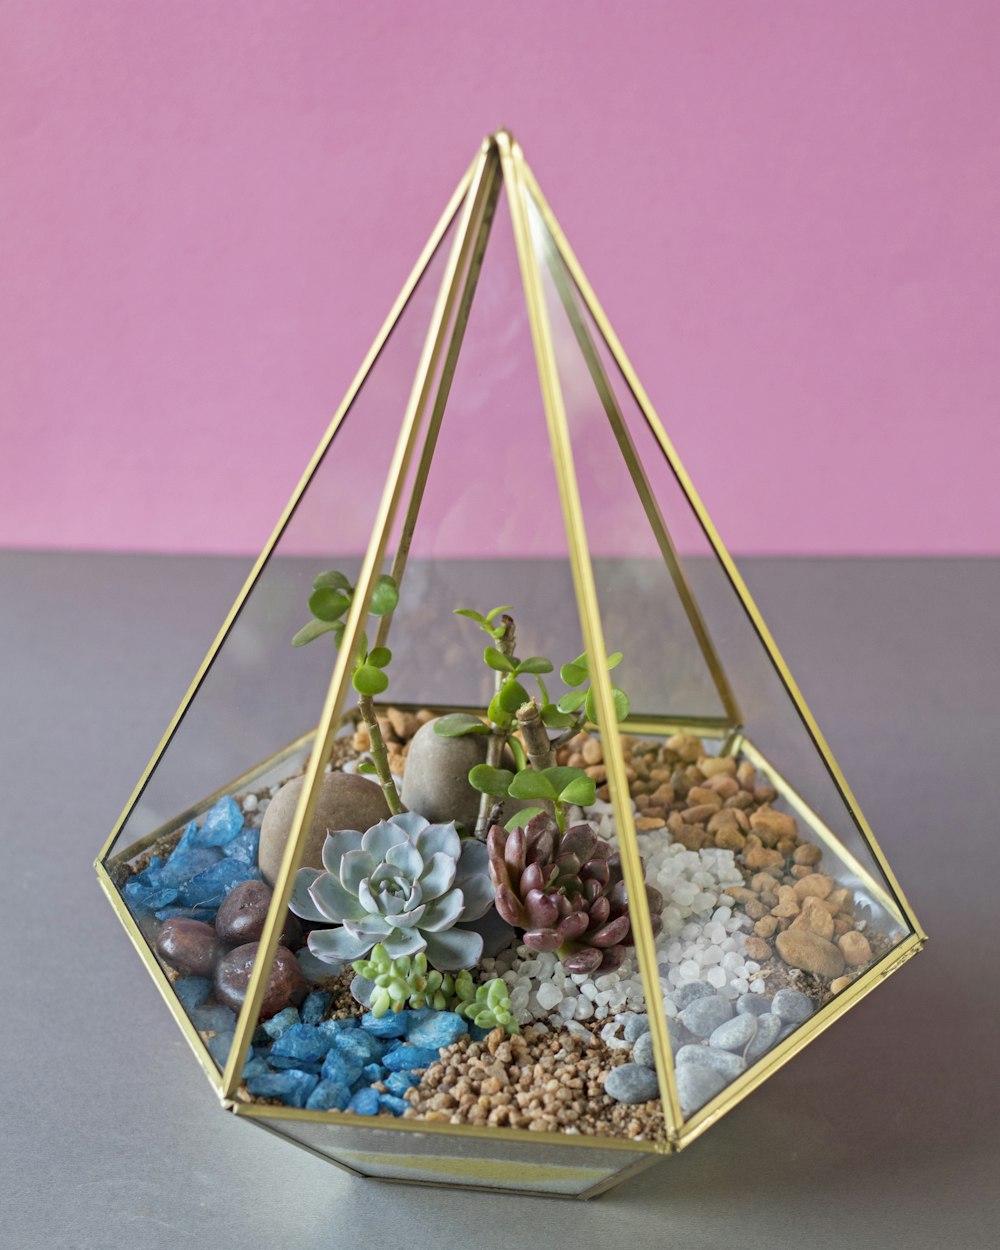 a glass terrarium filled with rocks and plants